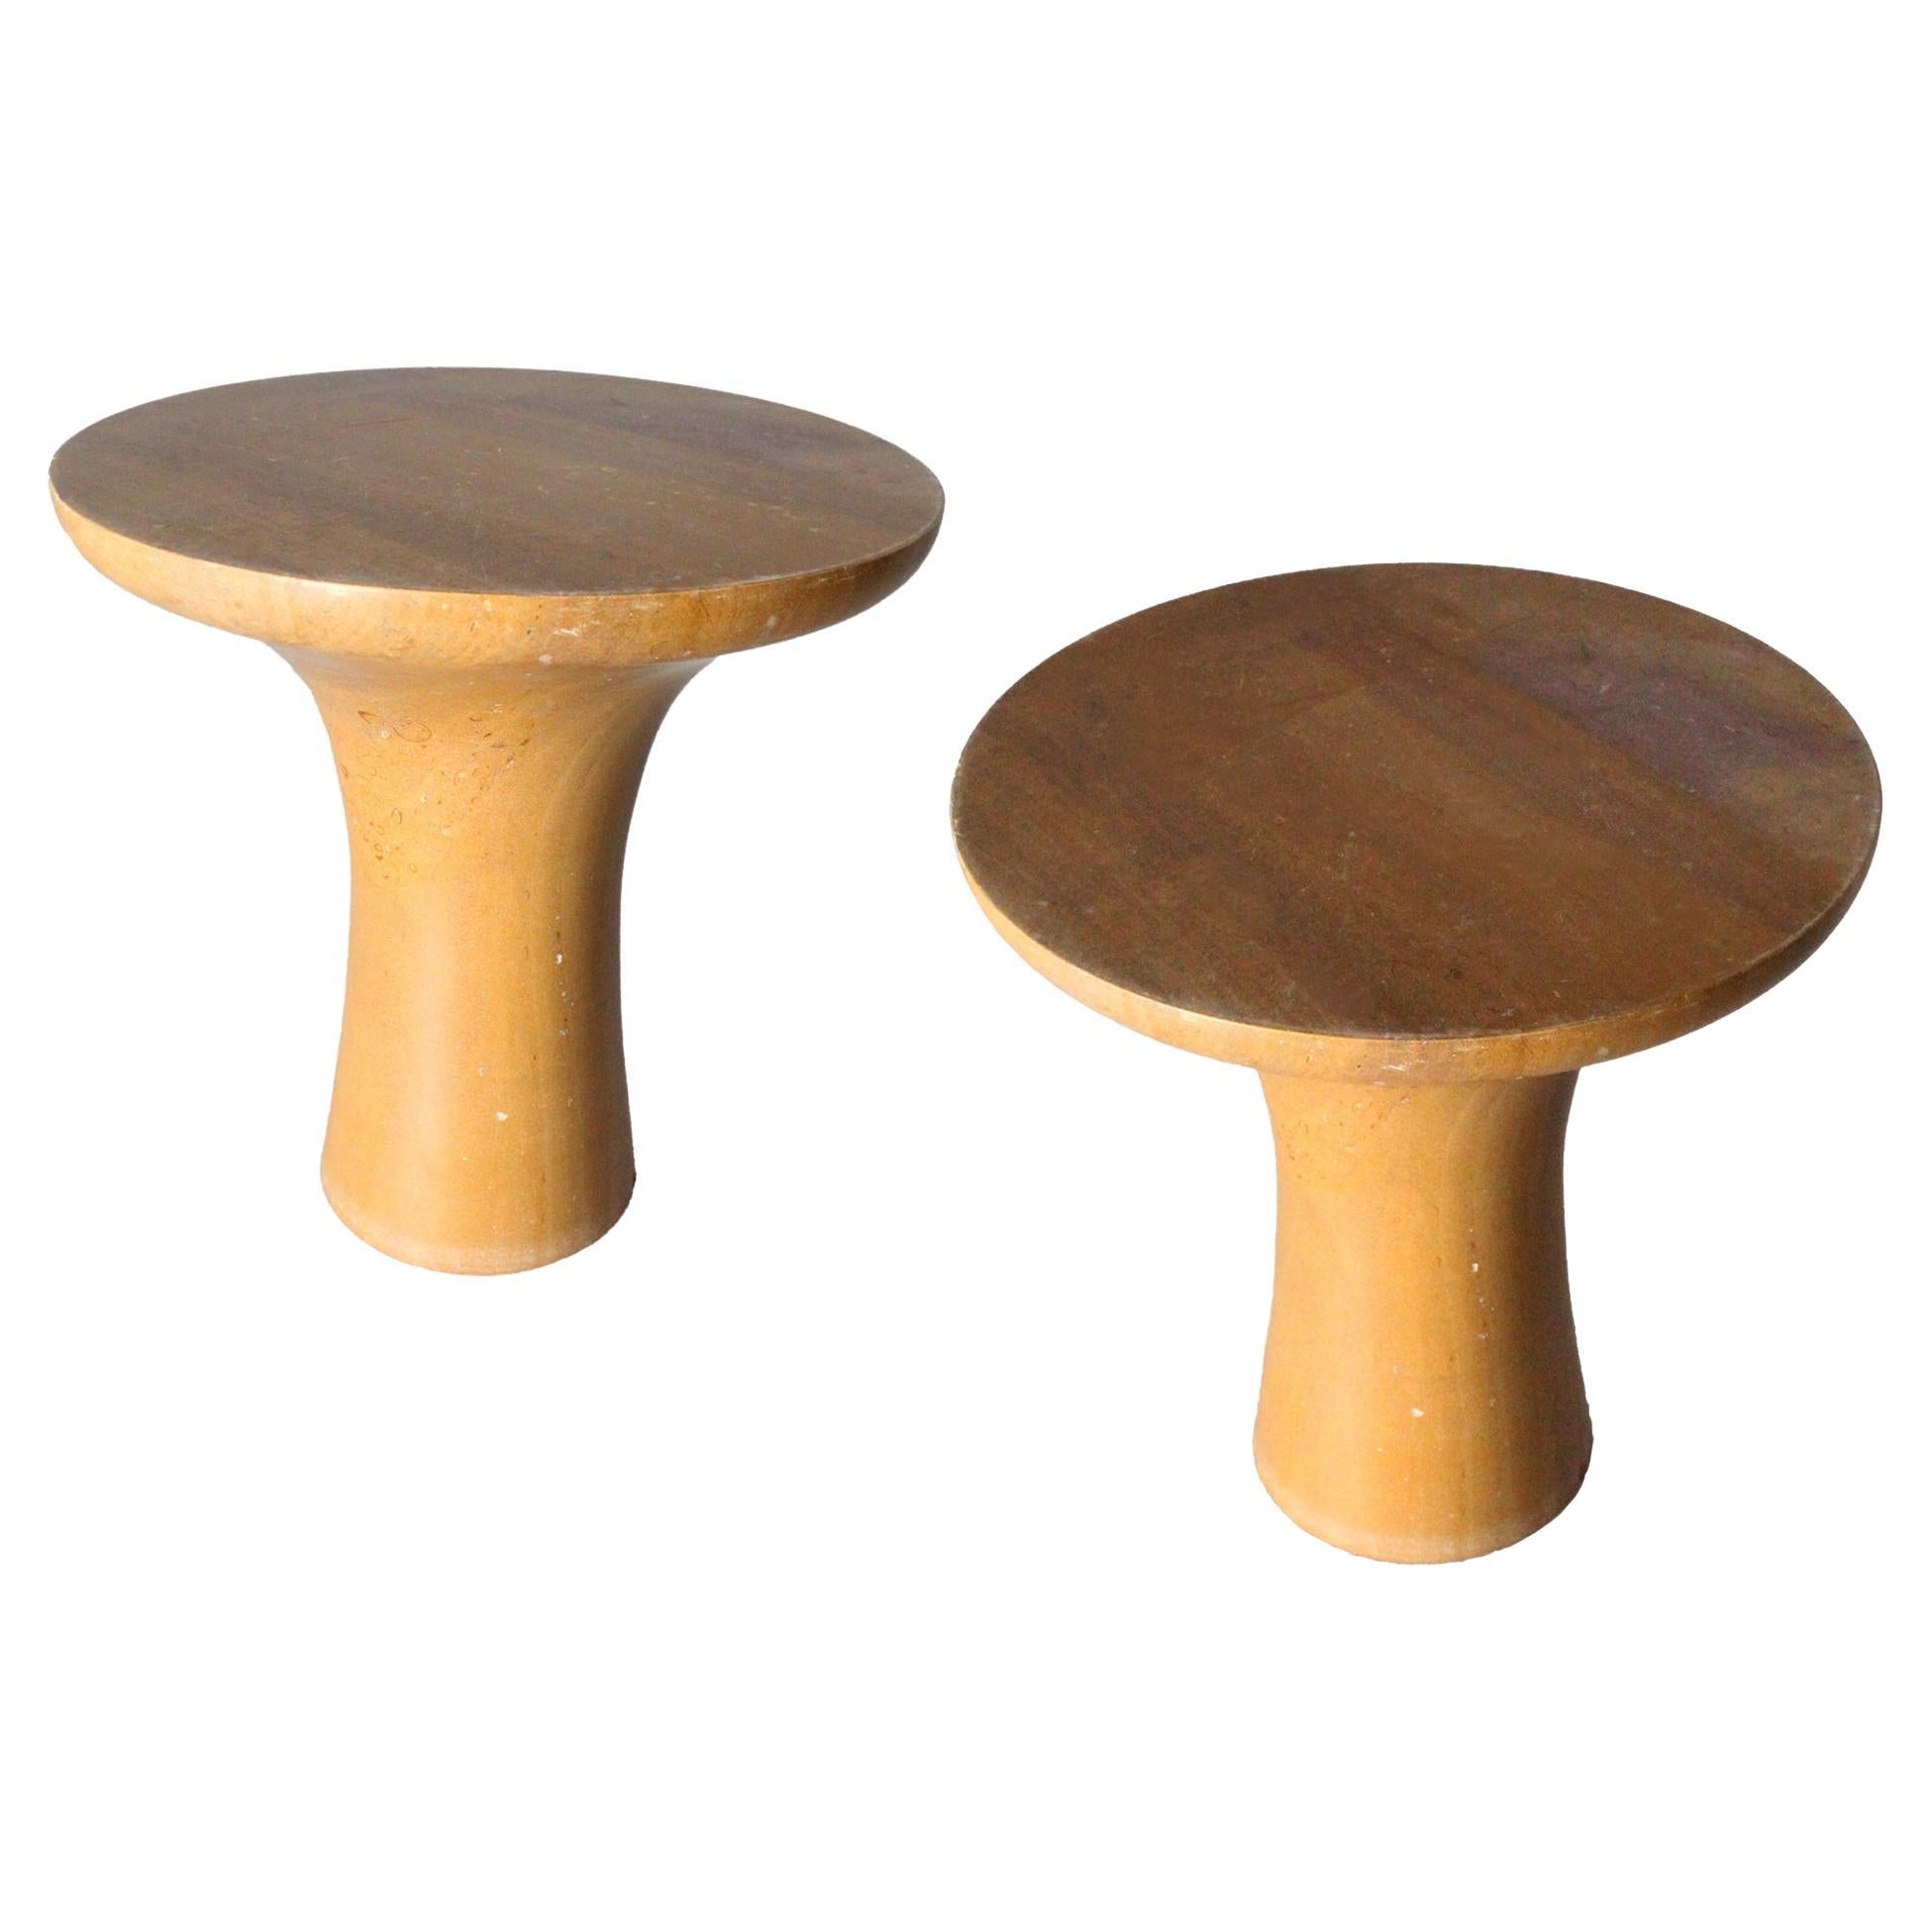 Set of Two Tabla Tables in Jaisalmer Stone Handcrafted in India by Paul Mathieu